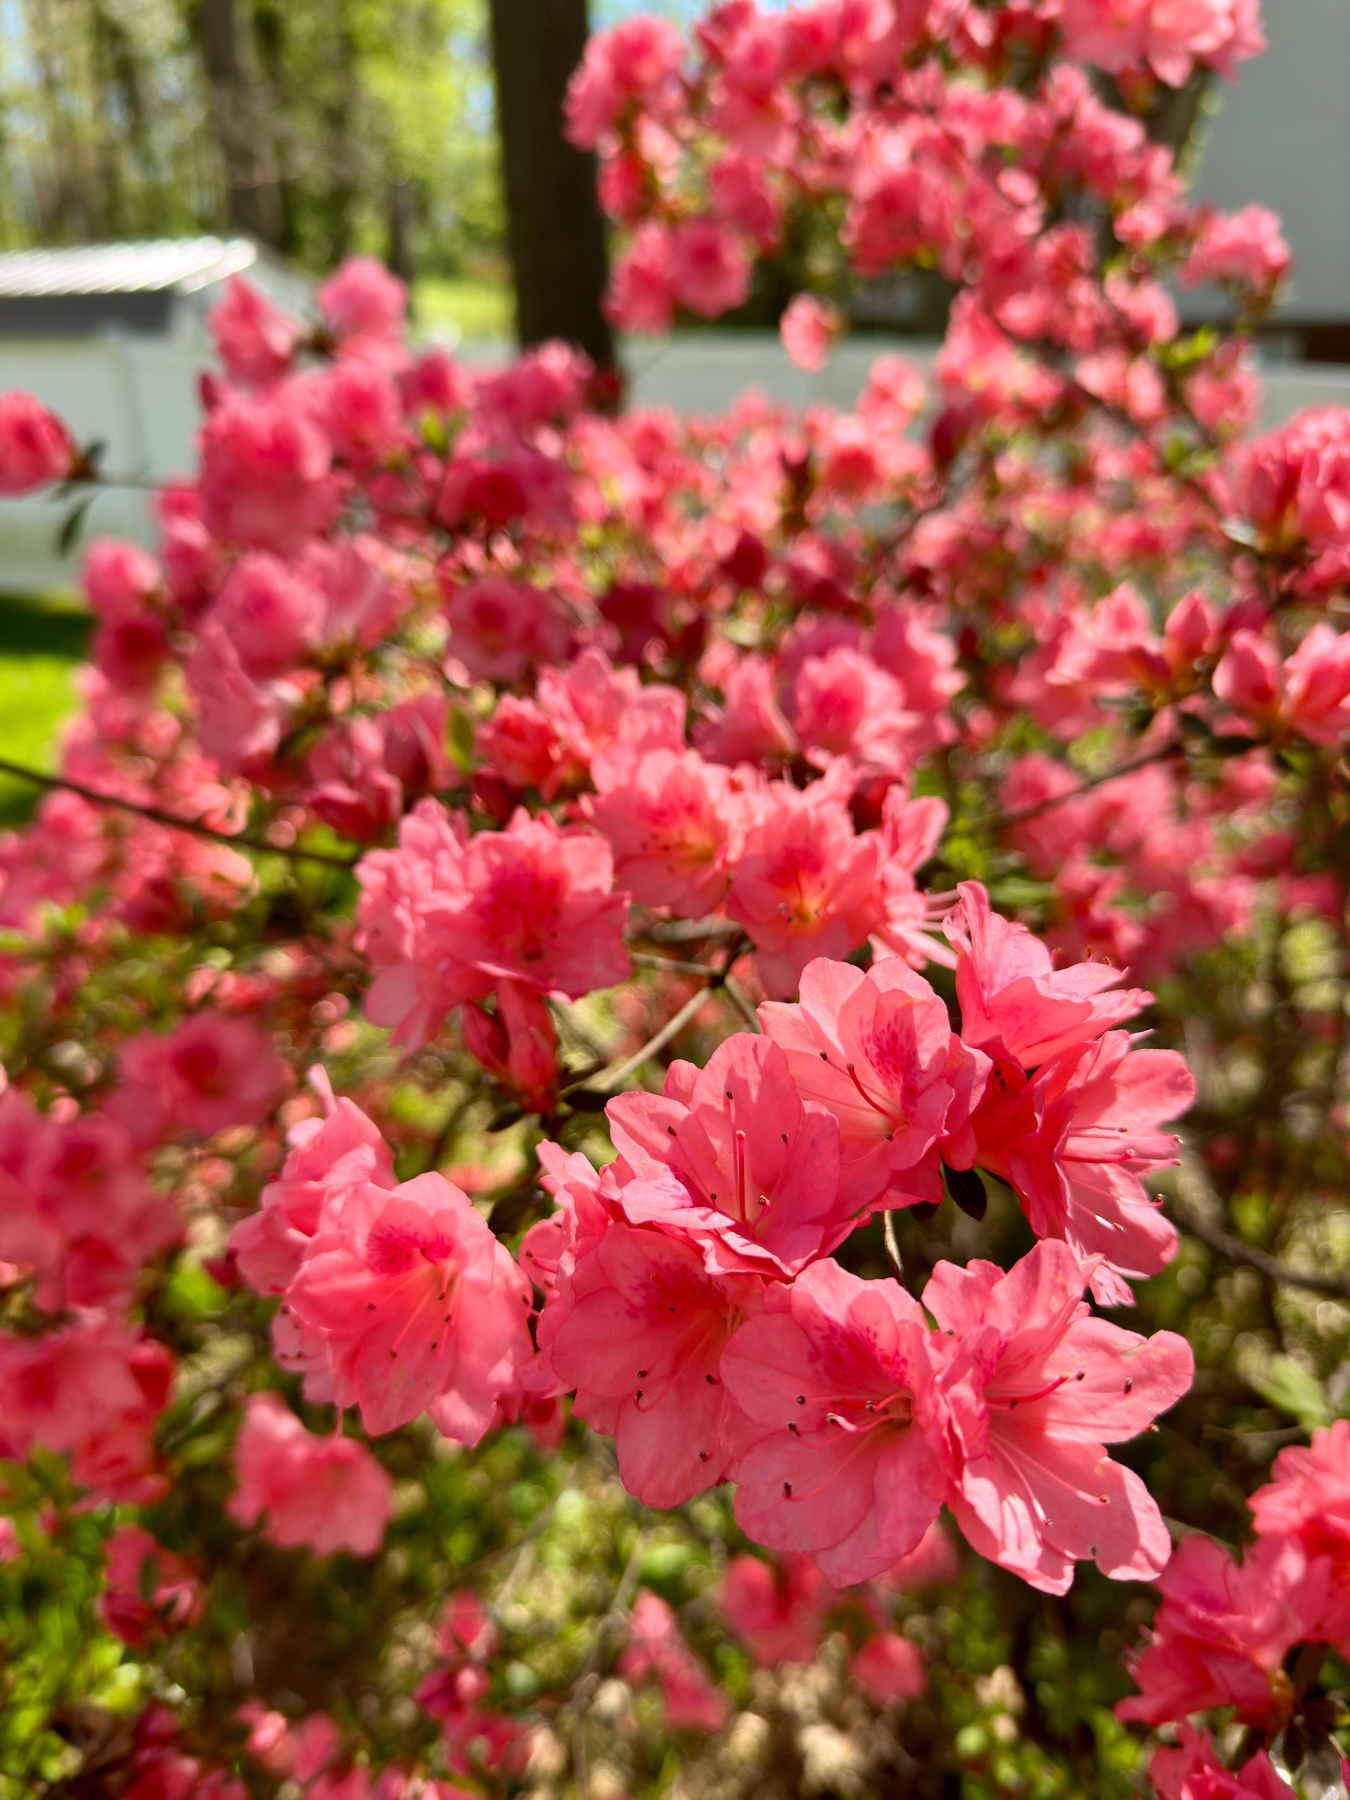 A close-up of vibrant pink azalea flowers in bloom with a soft-focus background of greenery and a bright, sunlit setting.